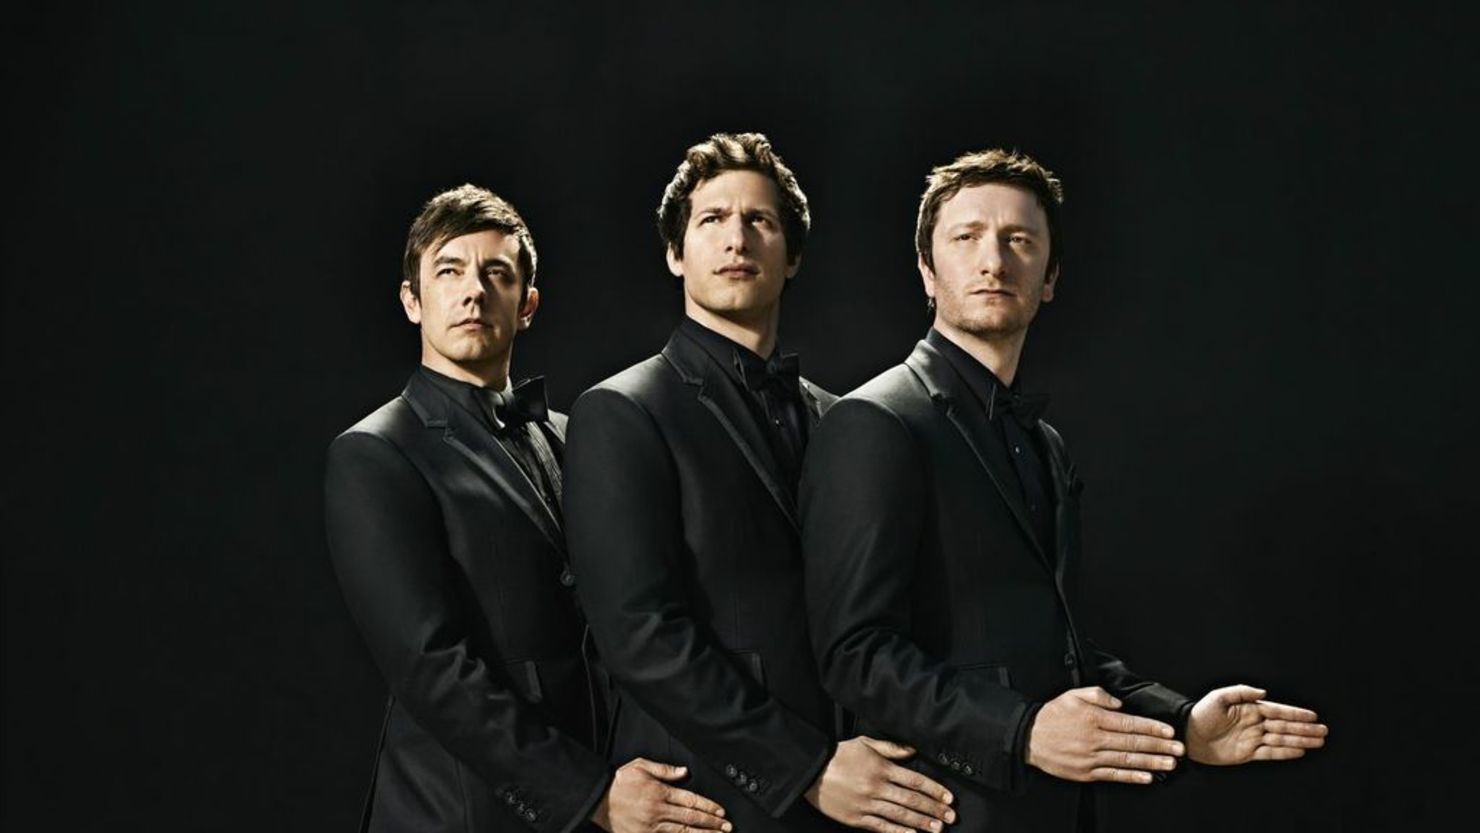 Jorma Taccone, Andy Samberg, and Akiva Schaffer make up the group The Lonely Island.